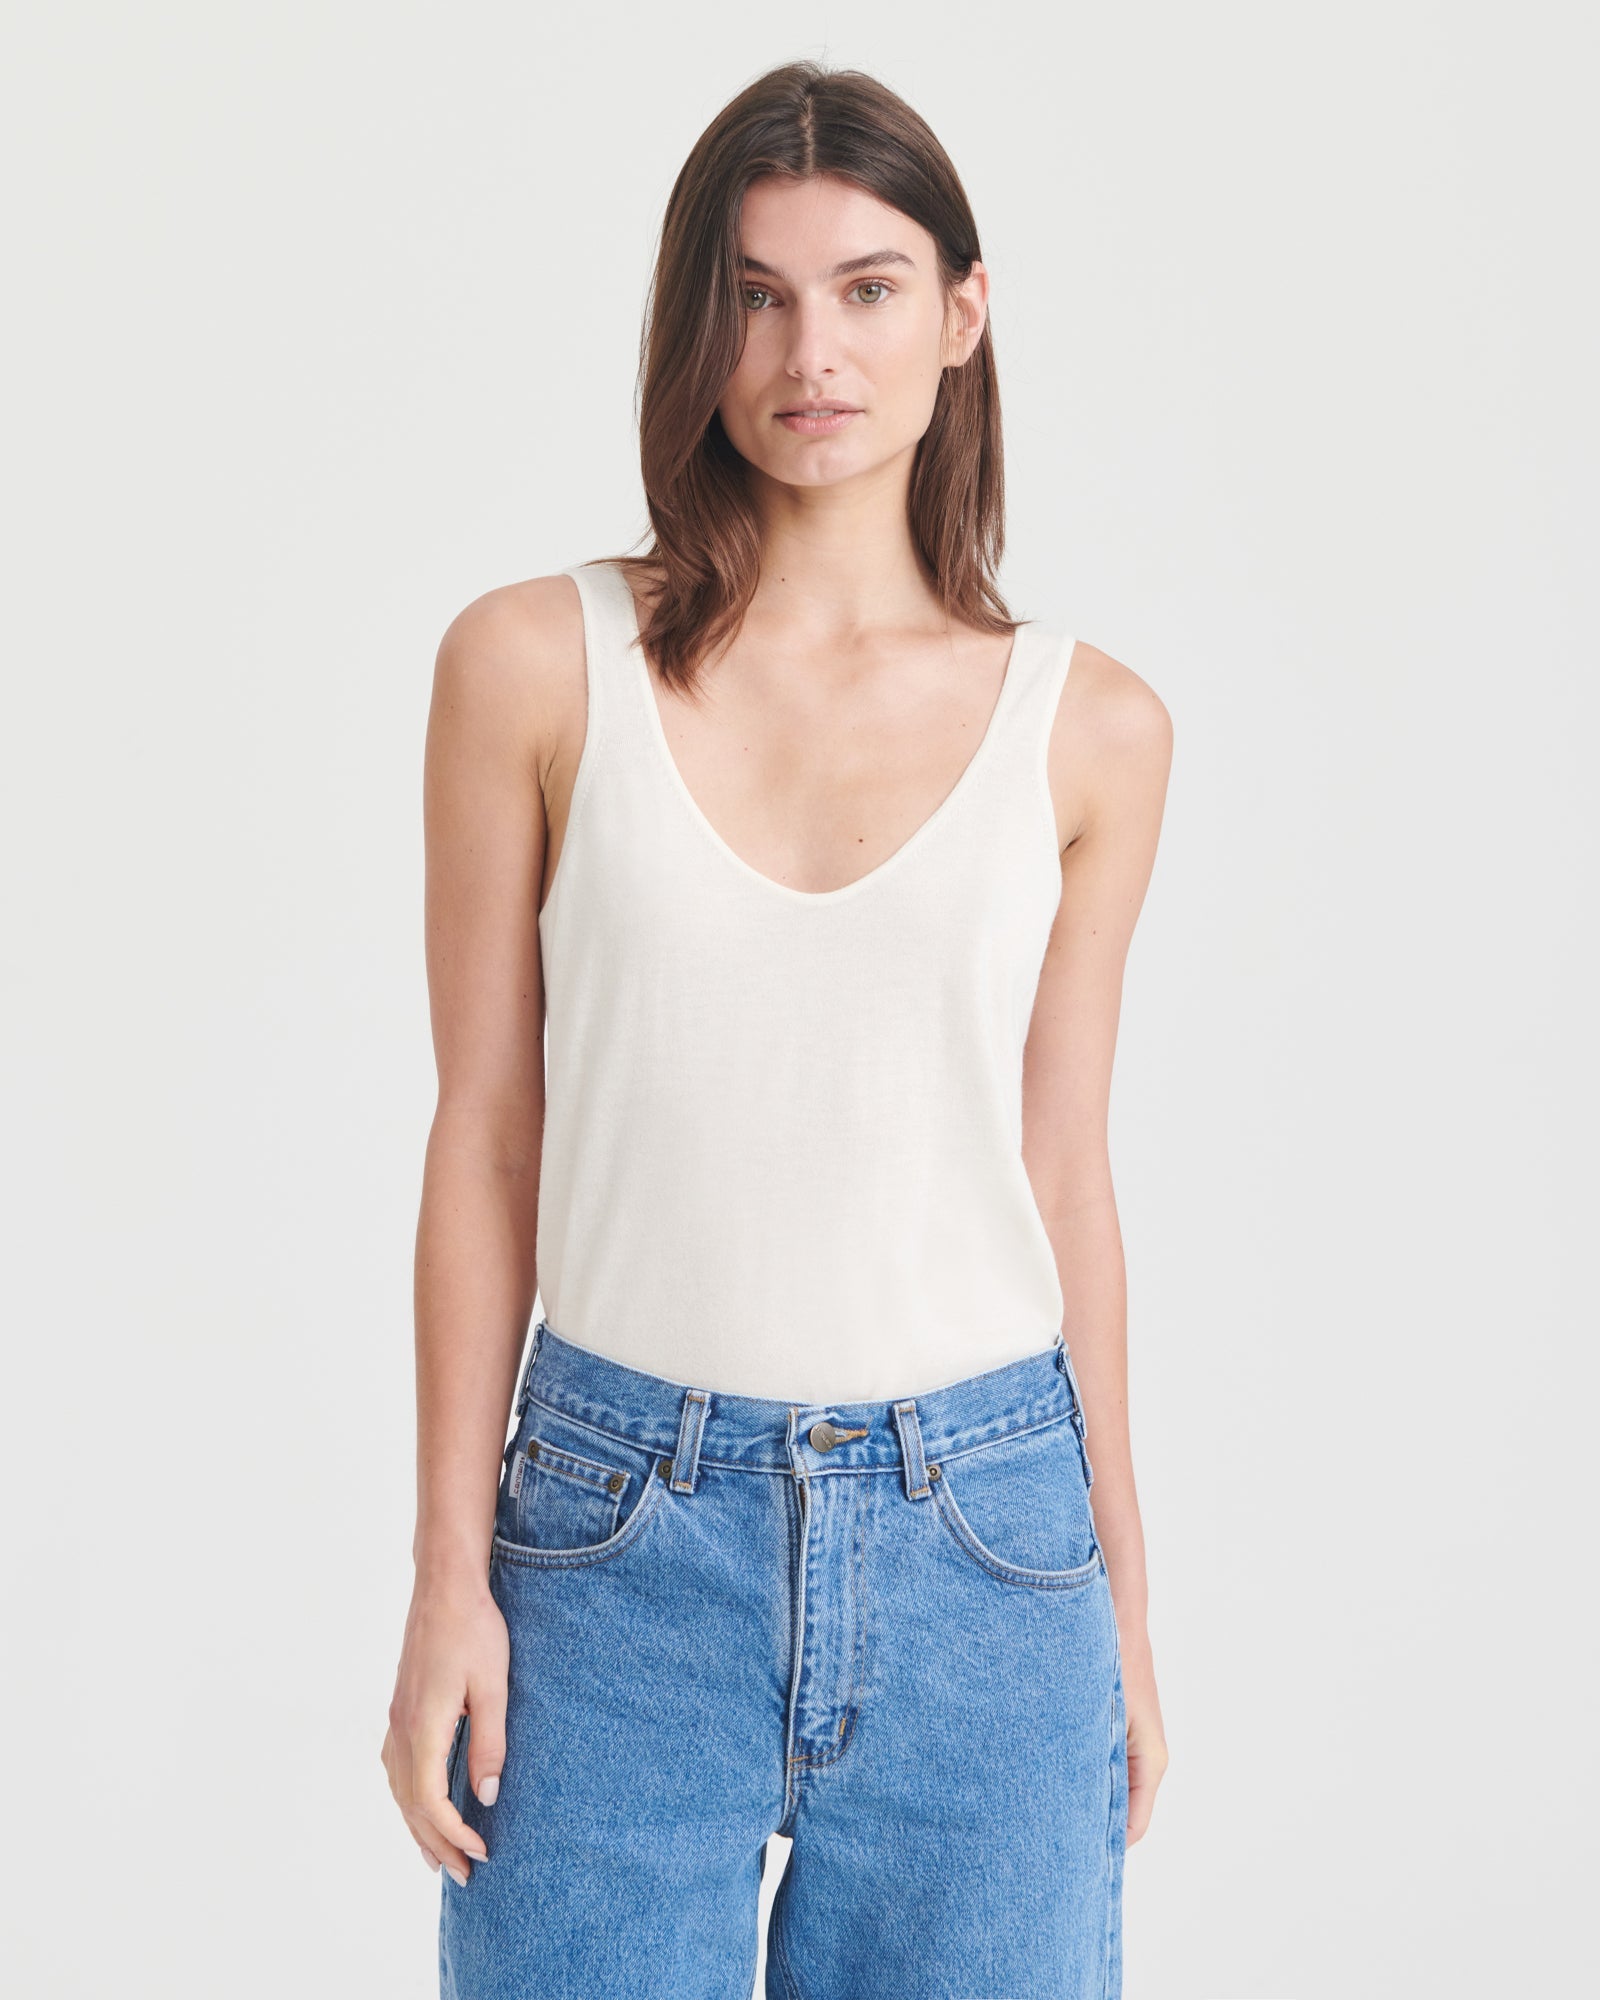 Sweater Tank in Fine Cashmere - Ivory